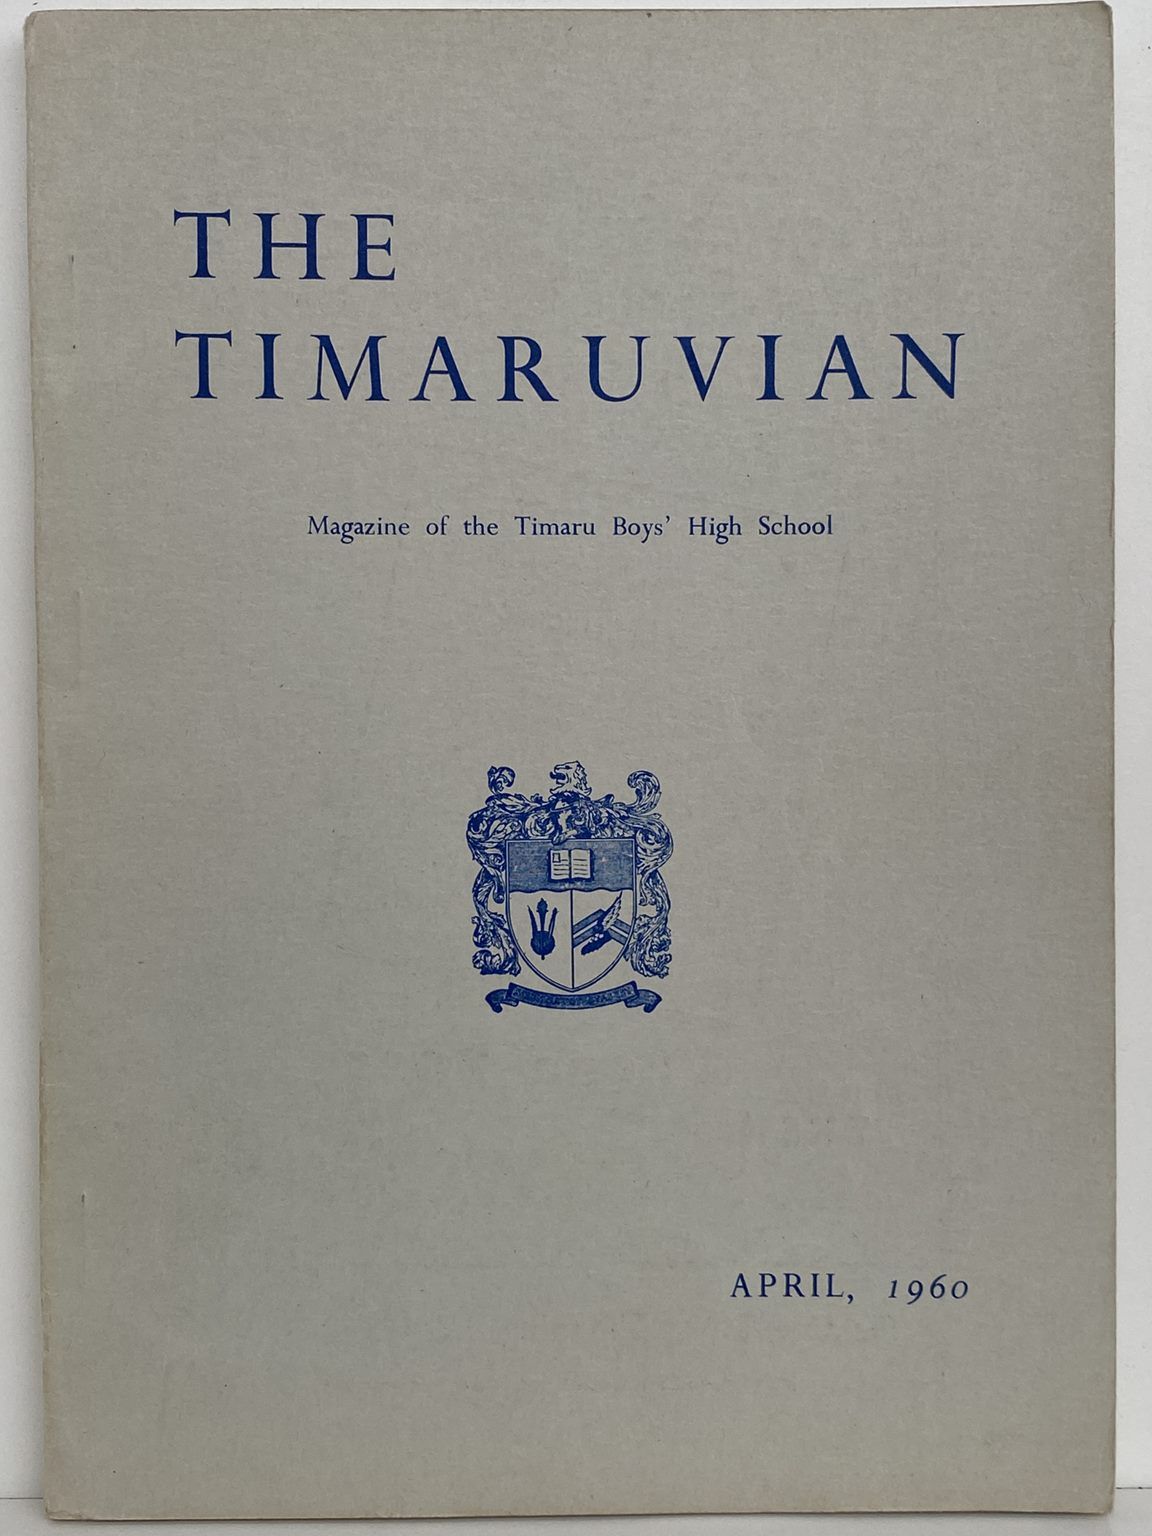 THE TIMARUVIAN: Magazine of the Timaru Boys' High School and its Old Boys' Association 1960